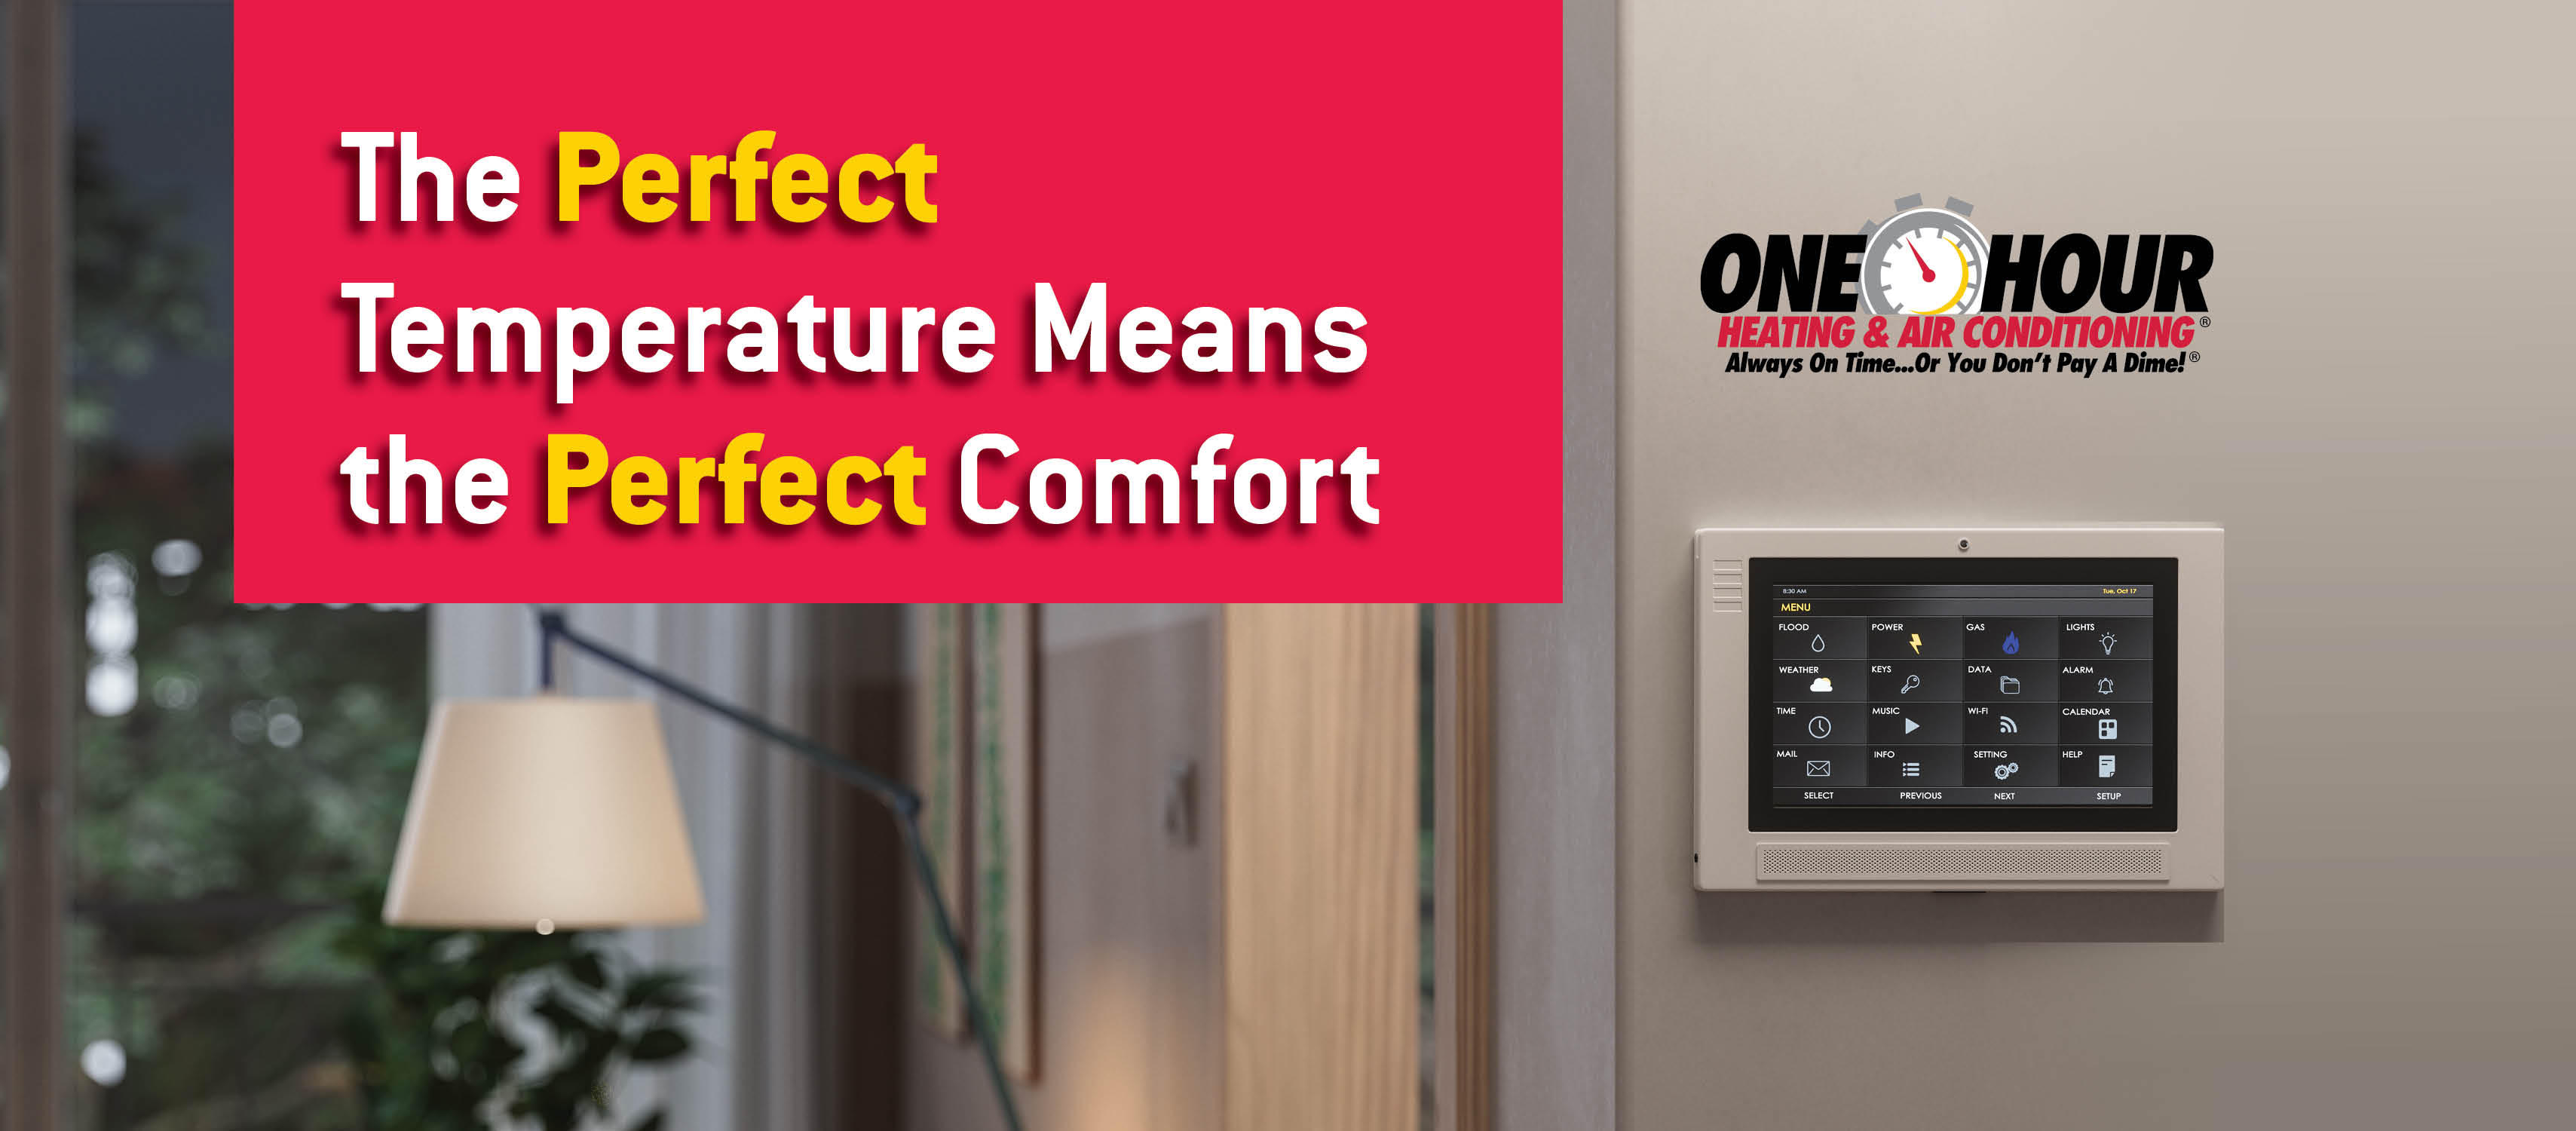 Home's smart thermostat in the background with overlay text that says The perfect temperature means the perfect comfort with the one hour logo | One Hour Heating & Air Conditioning |  Proudly serving  Cedar Park, Leander, Liberty Hill, & Lago Vista, TX and surrounding areas